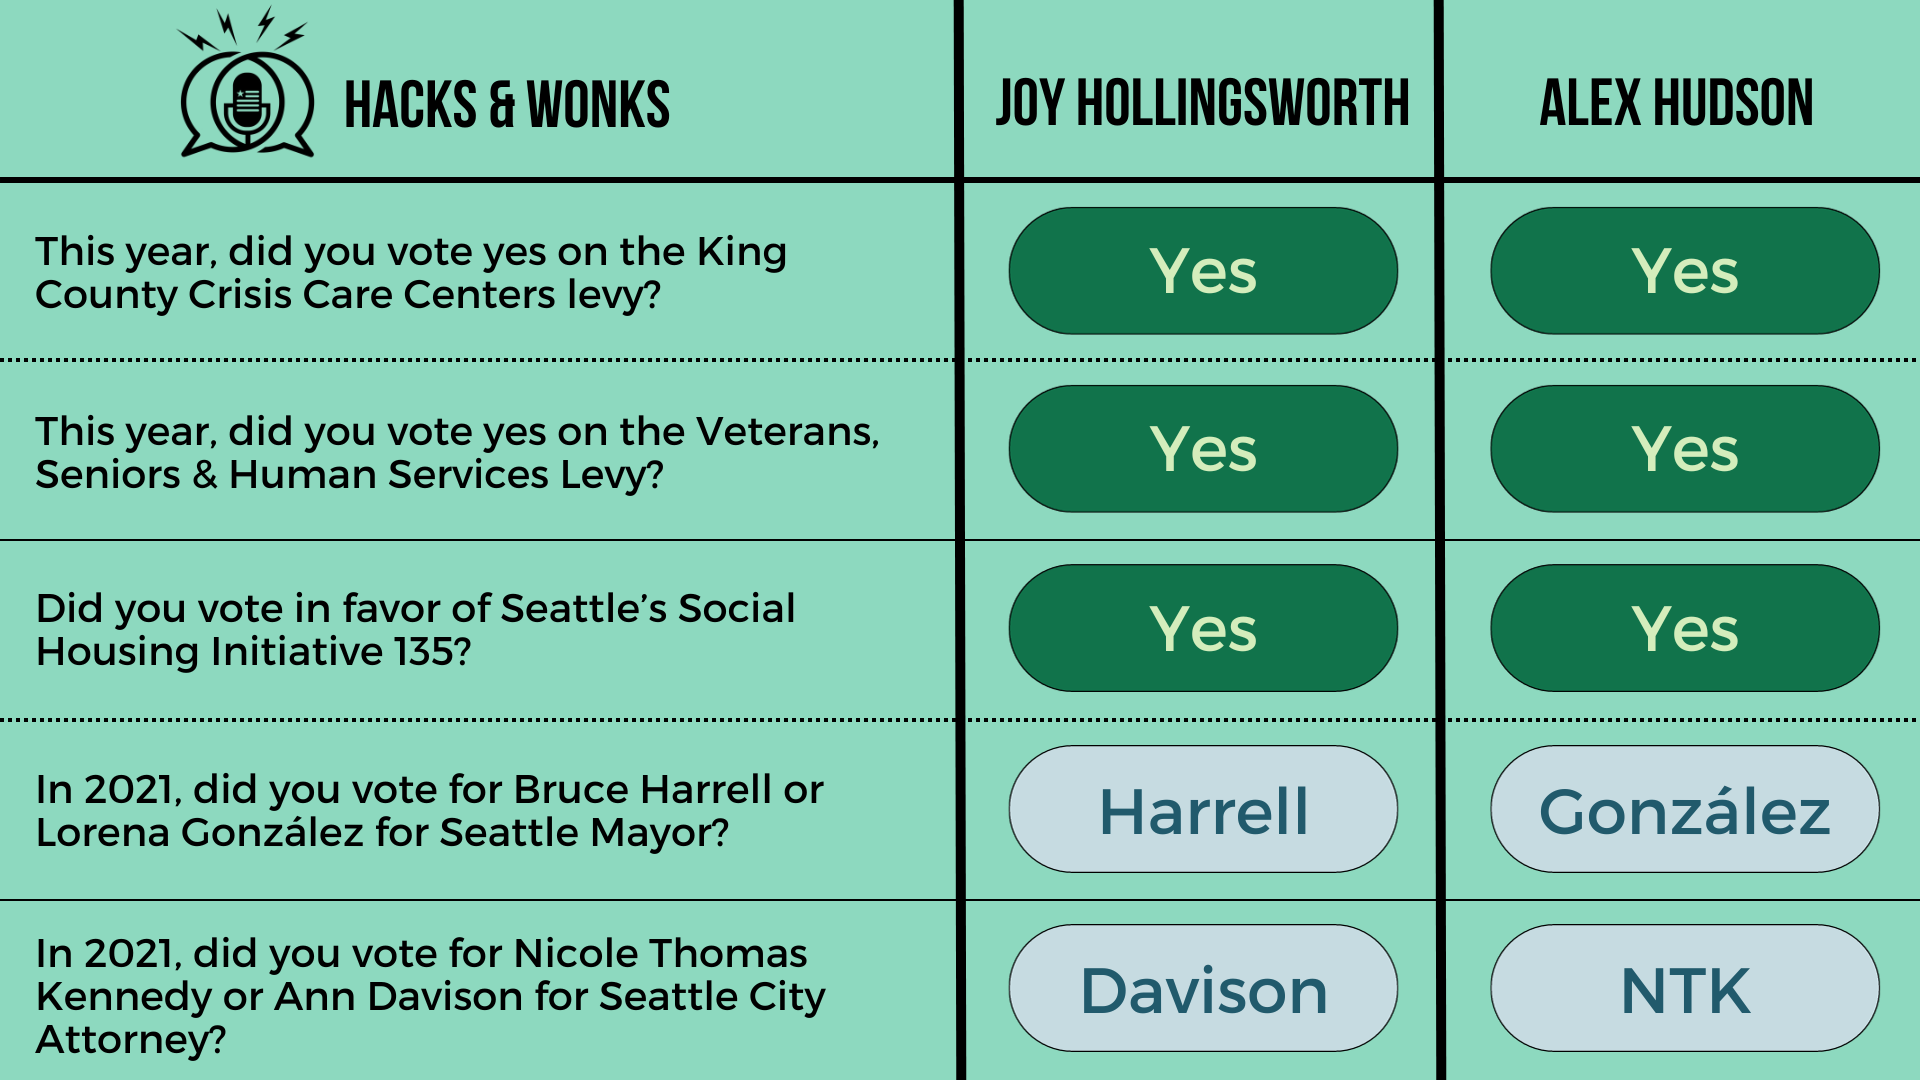 Q: This year, did you vote yes on the King County Crisis Care Centers levy? Joy Hollingsworth: Yes, Alex Hudson: Yes  Q: This year, did you vote yes on the Veterans, Seniors & Human Services Levy? Joy Hollingsworth: Yes, Alex Hudson: Yes  Q: Did you